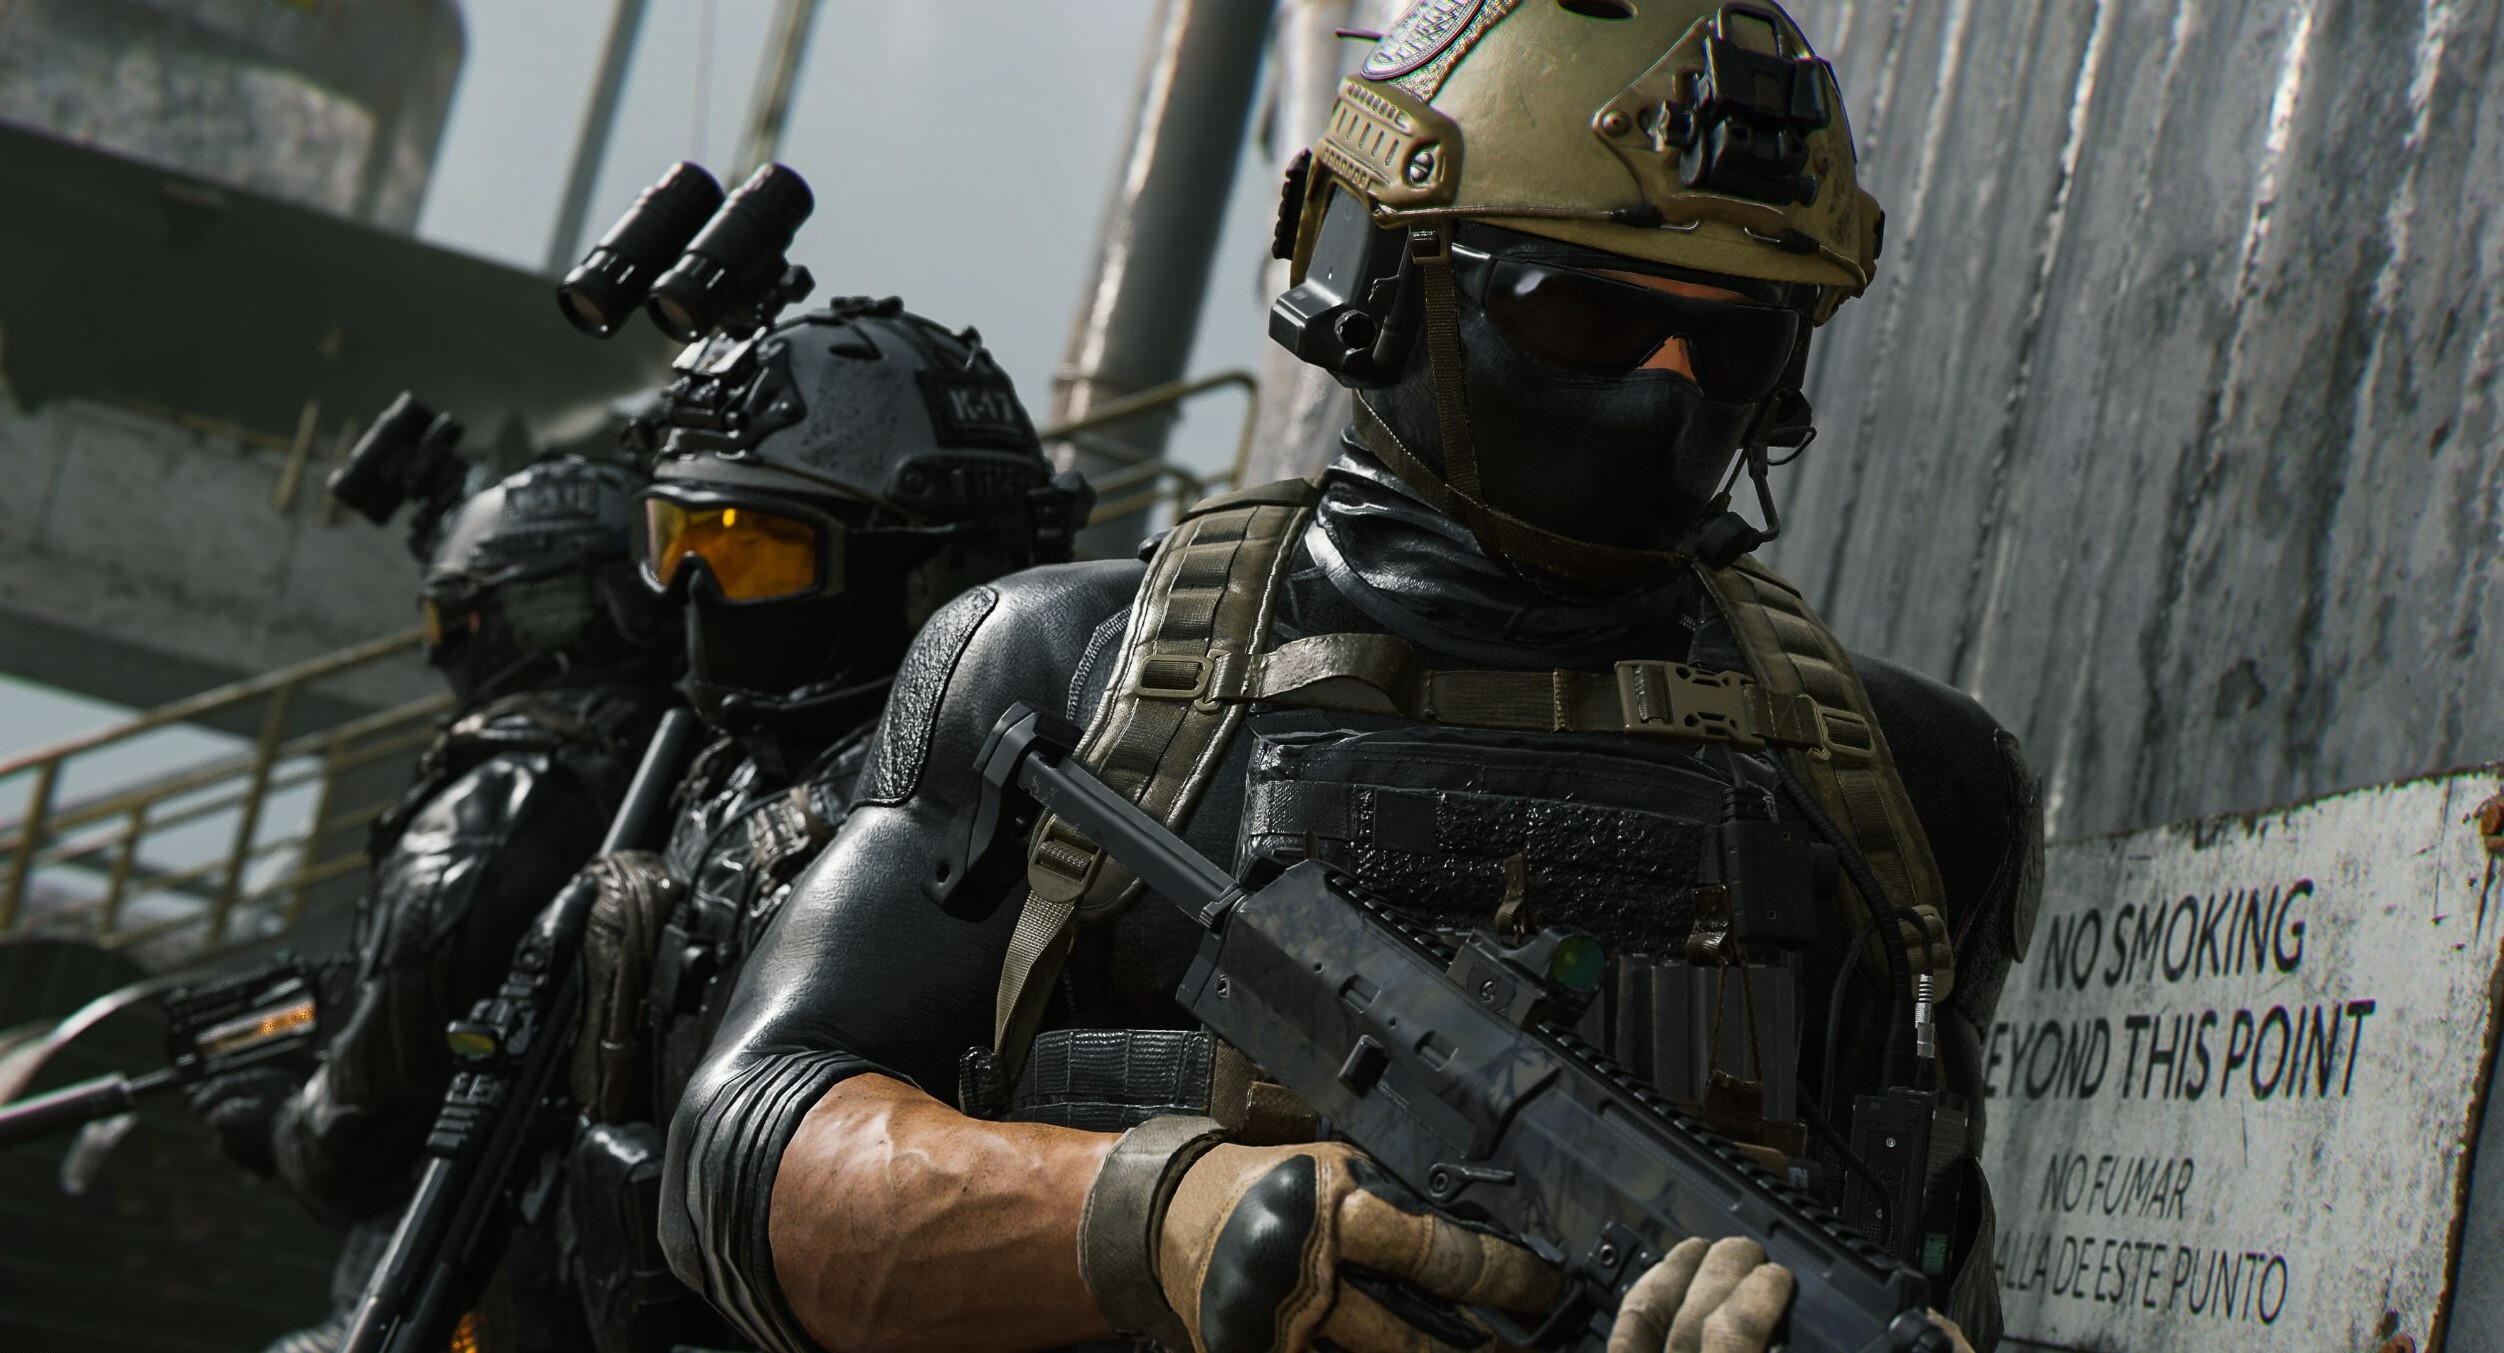 Call of Duty: Modern Warfare 3 release sees UK's biggest-ever